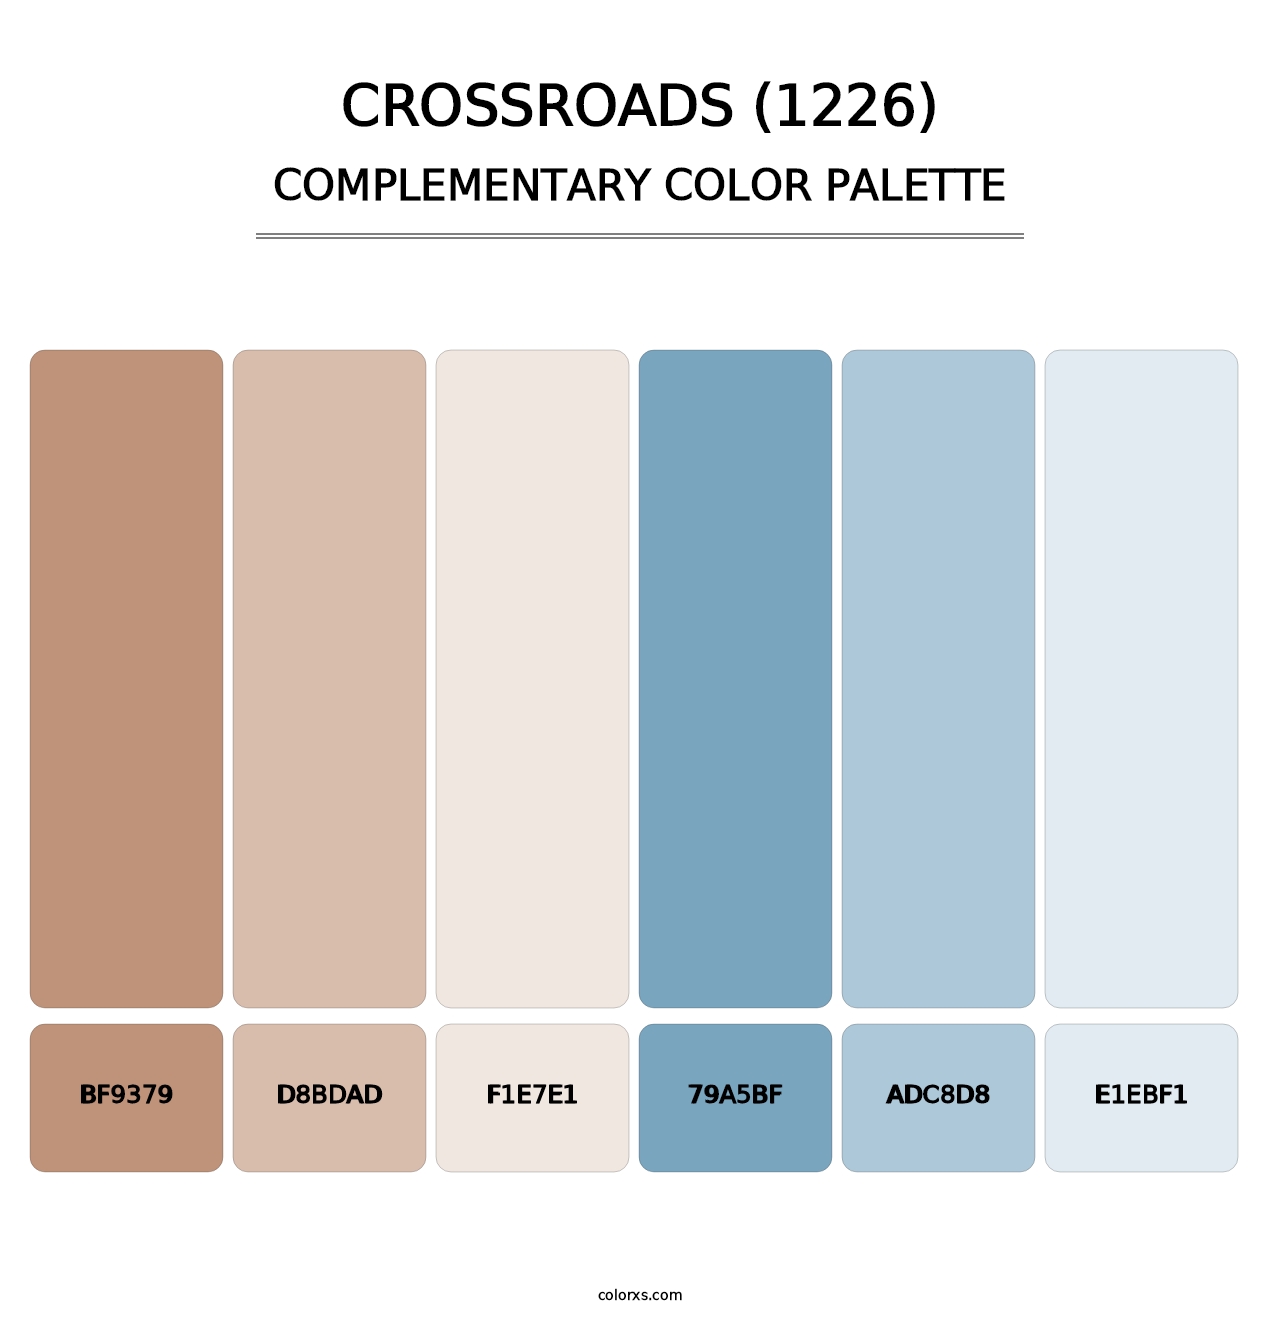 Crossroads (1226) - Complementary Color Palette